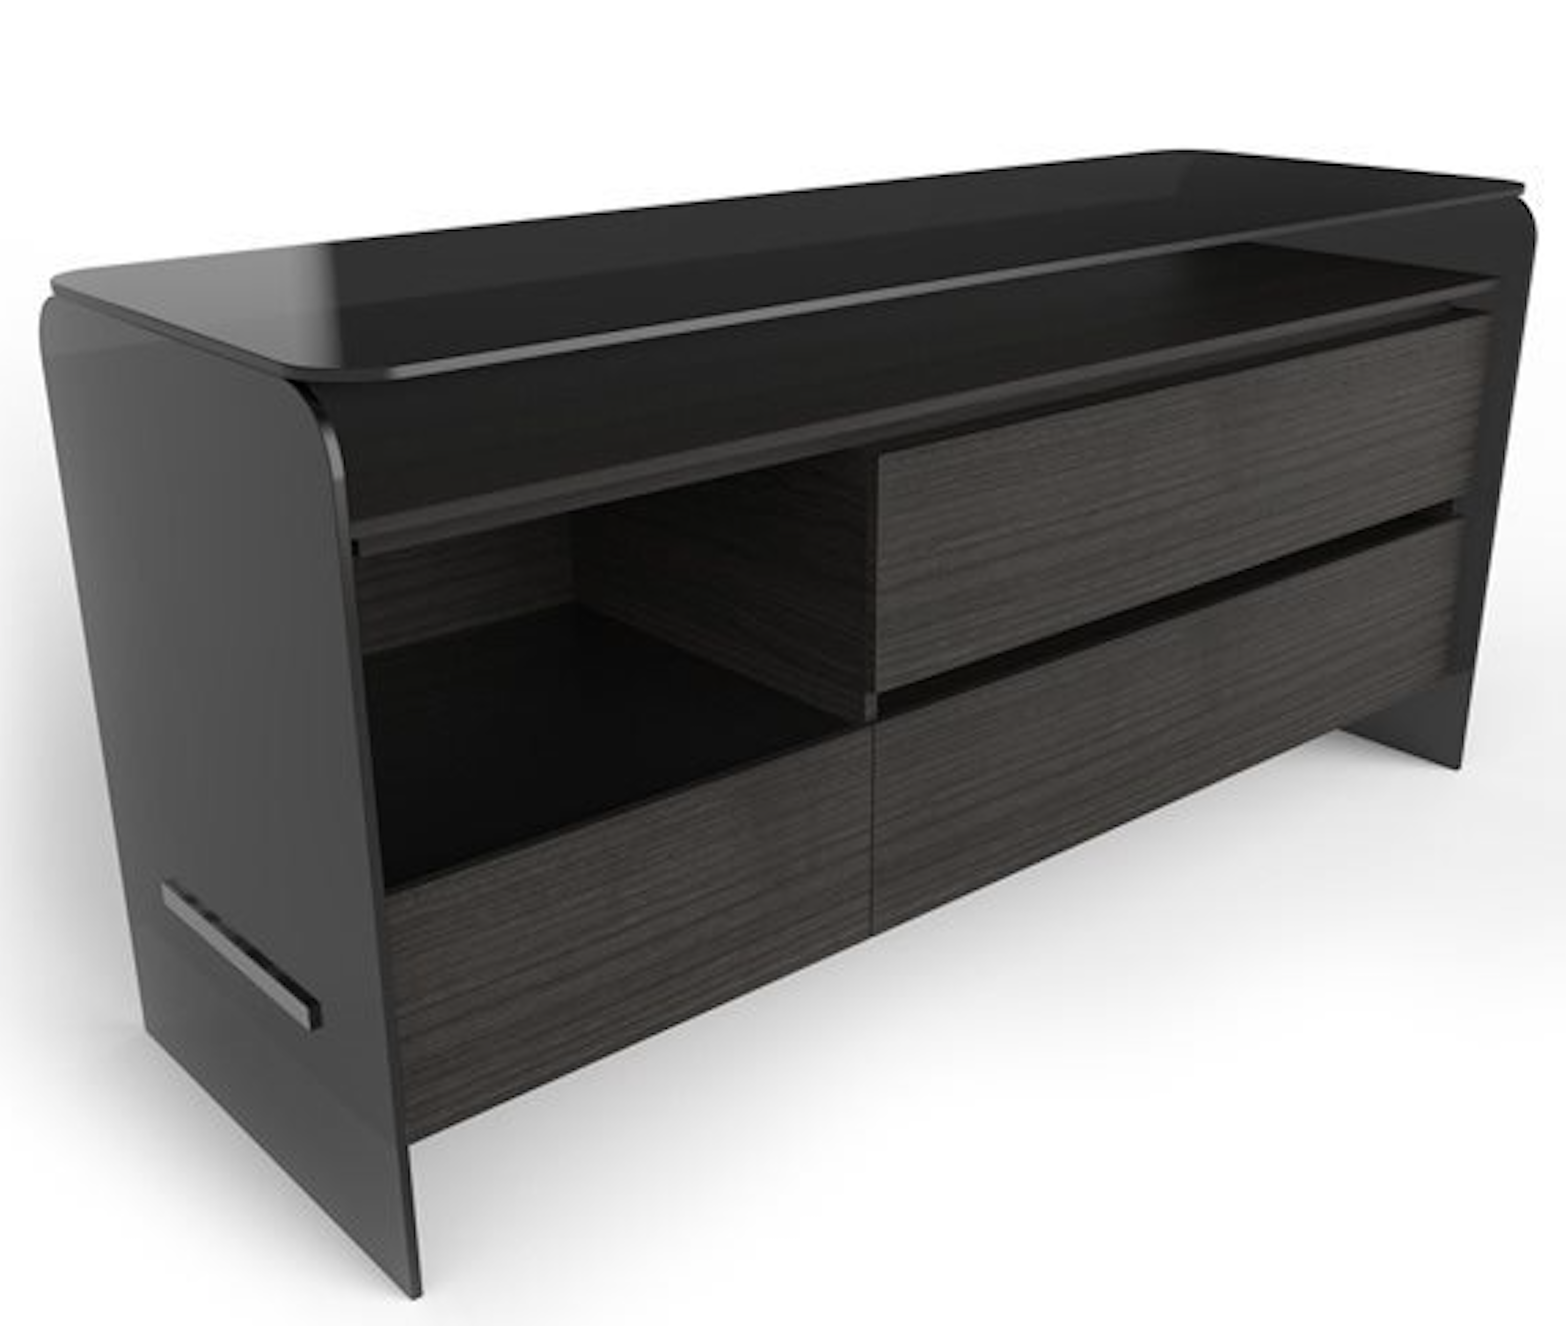 Product Image holly como chest of drawers